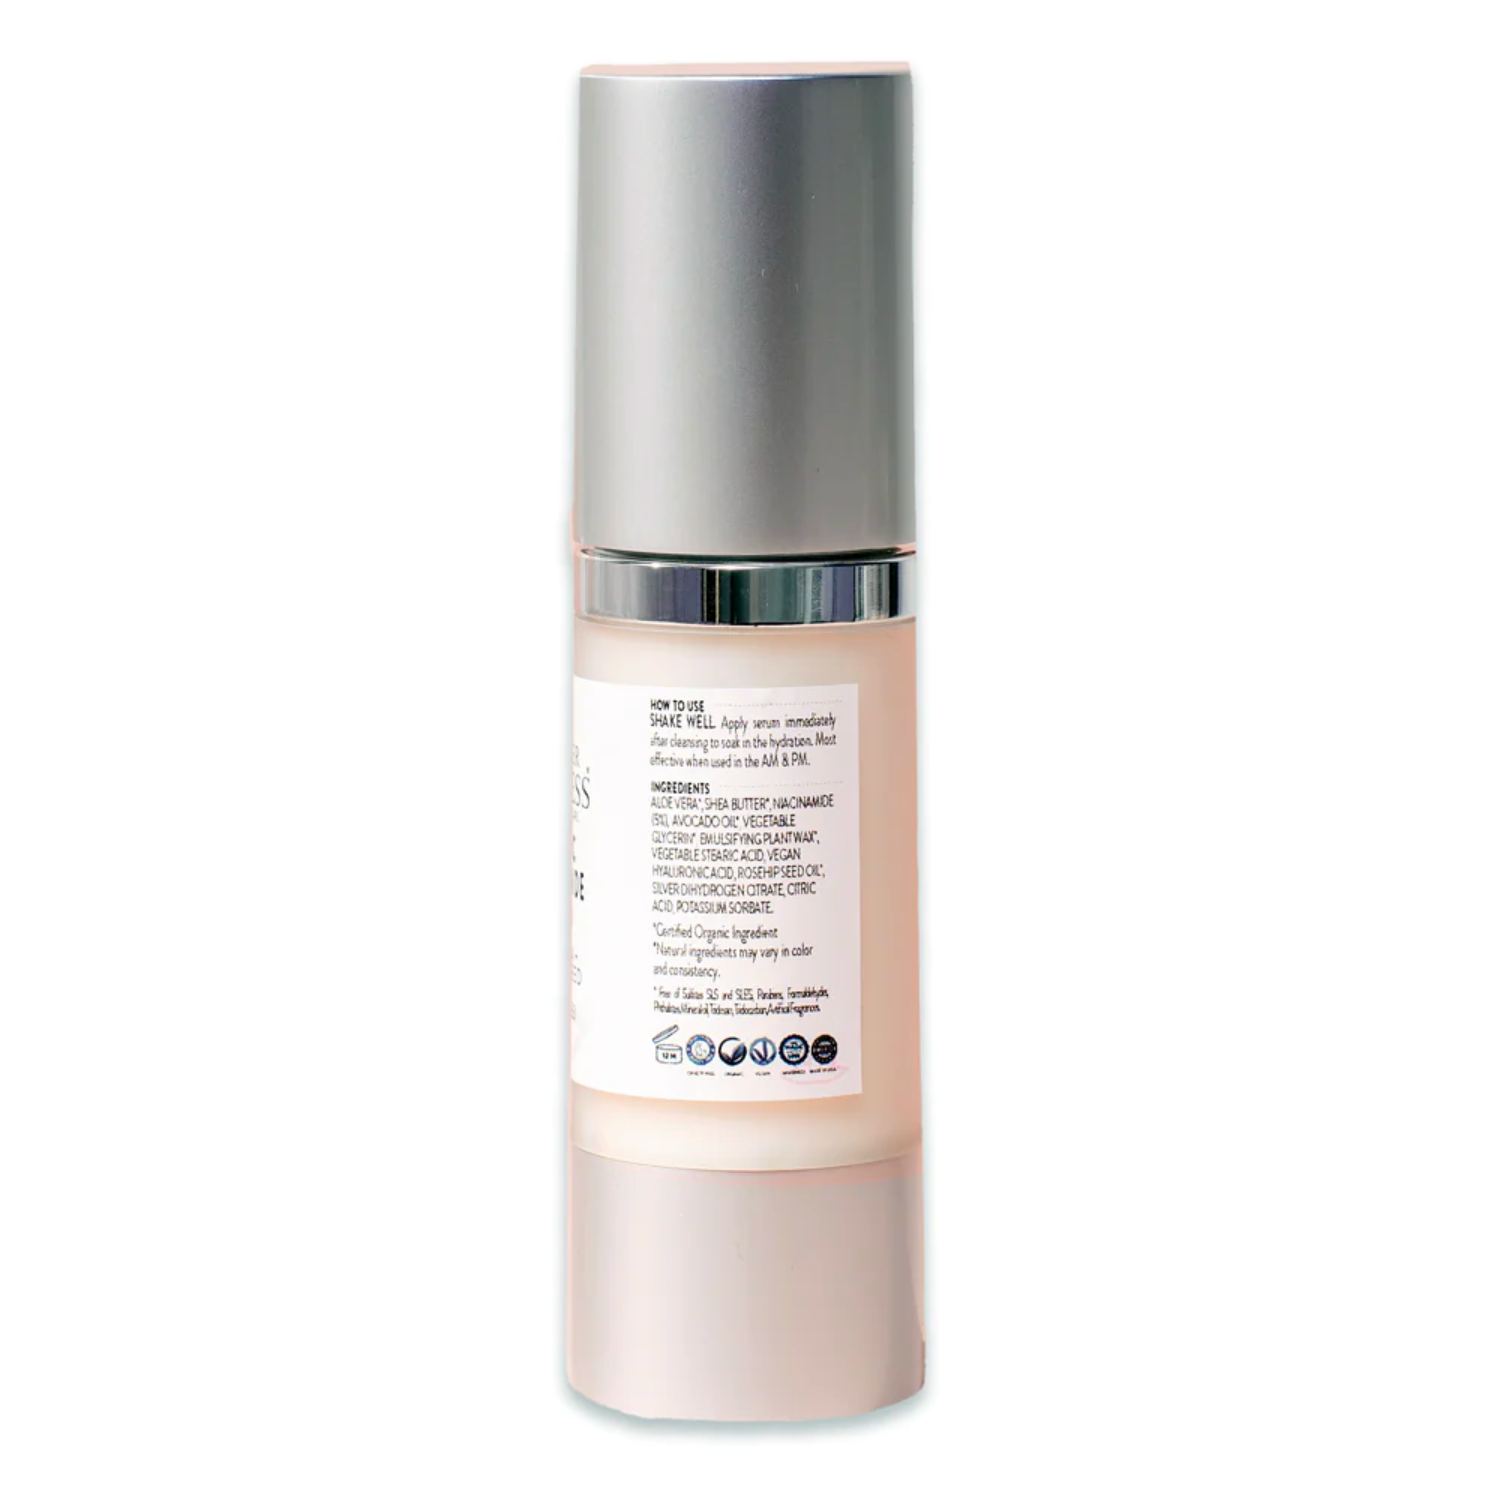 ORGANIC NIACINAMIDE ANTI AGING SERUM - TIGHTENS PORES, REDUCES WRINKLES WITH 5% NIACINAMIDE: A MIRACLE FOR YOUR SKIN